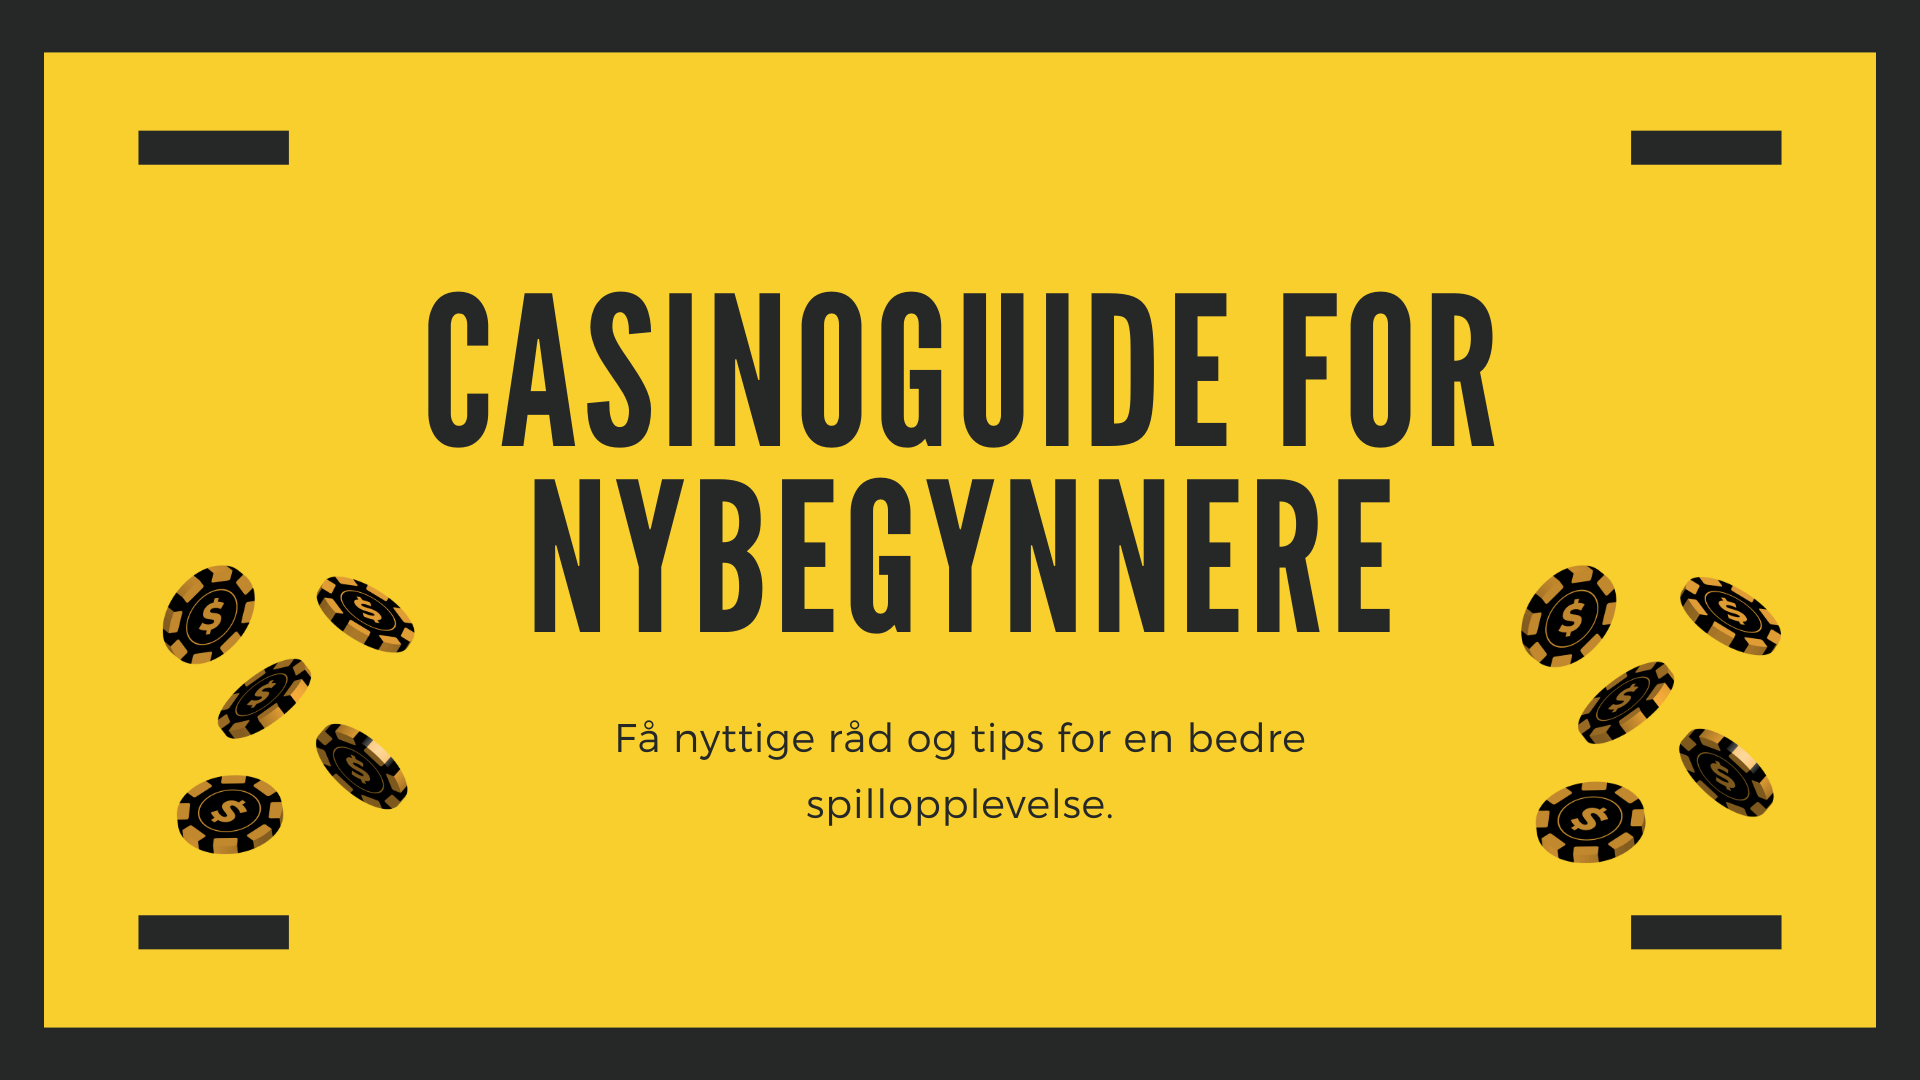 Casinoguide for nybegynnere